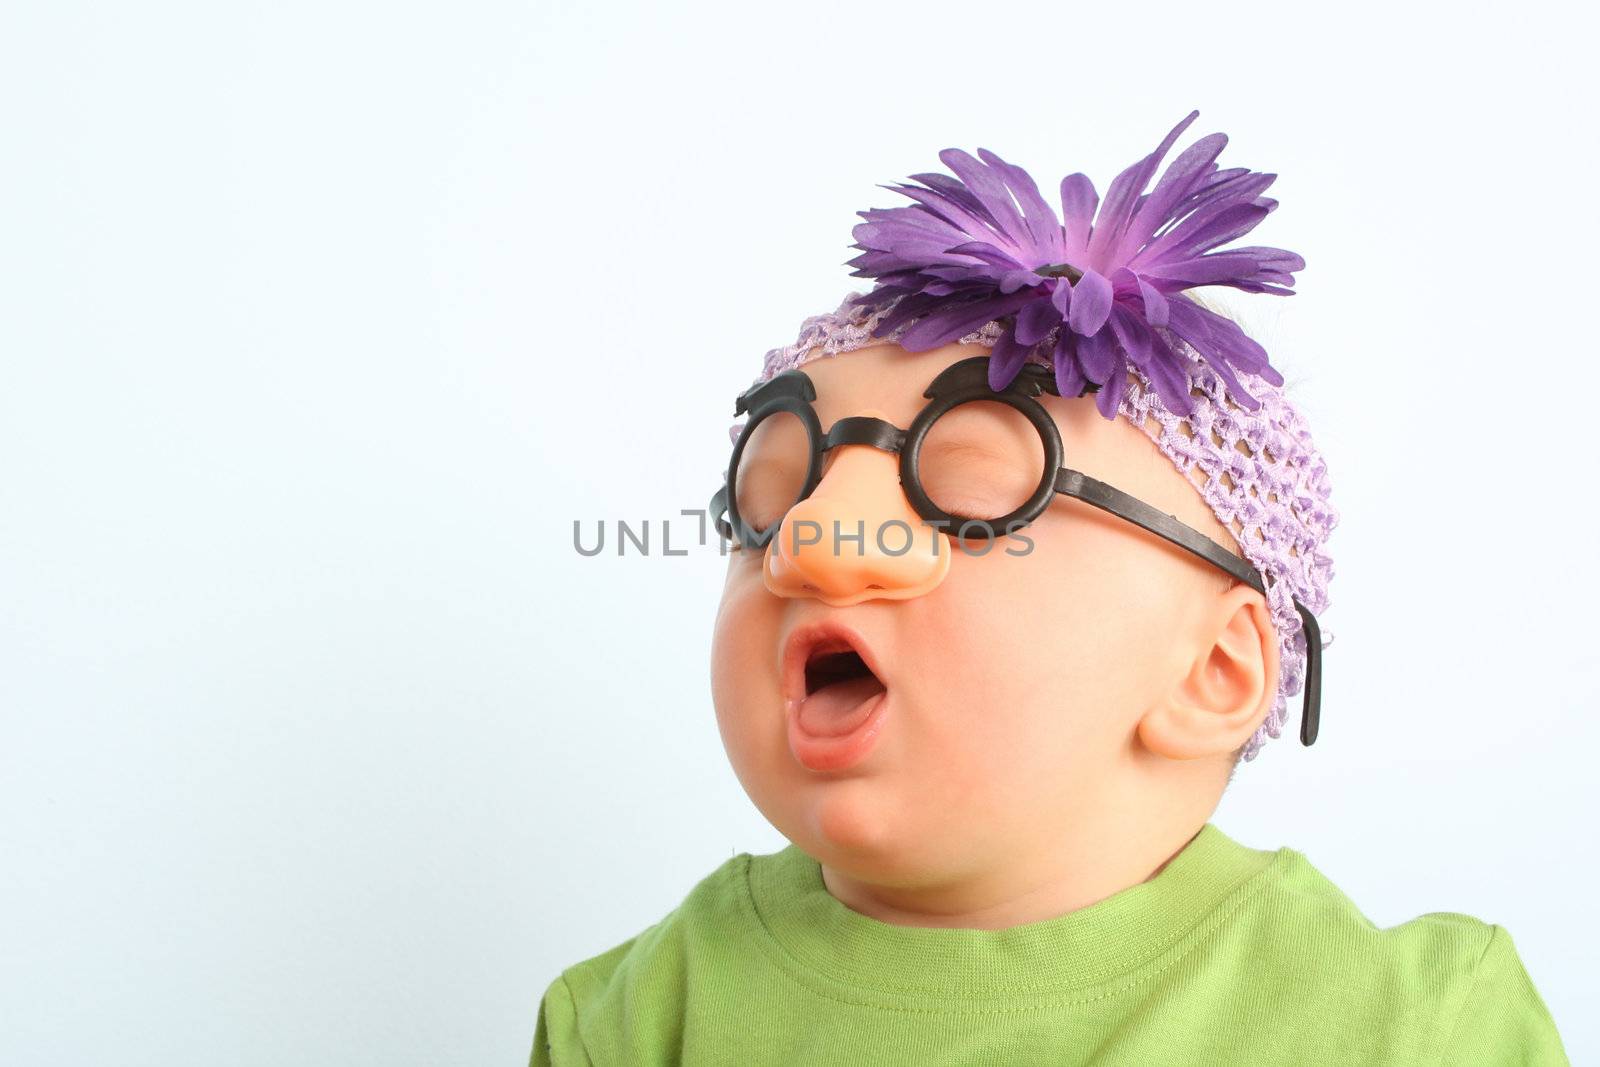 Funny baby wearing toy glasses and headband